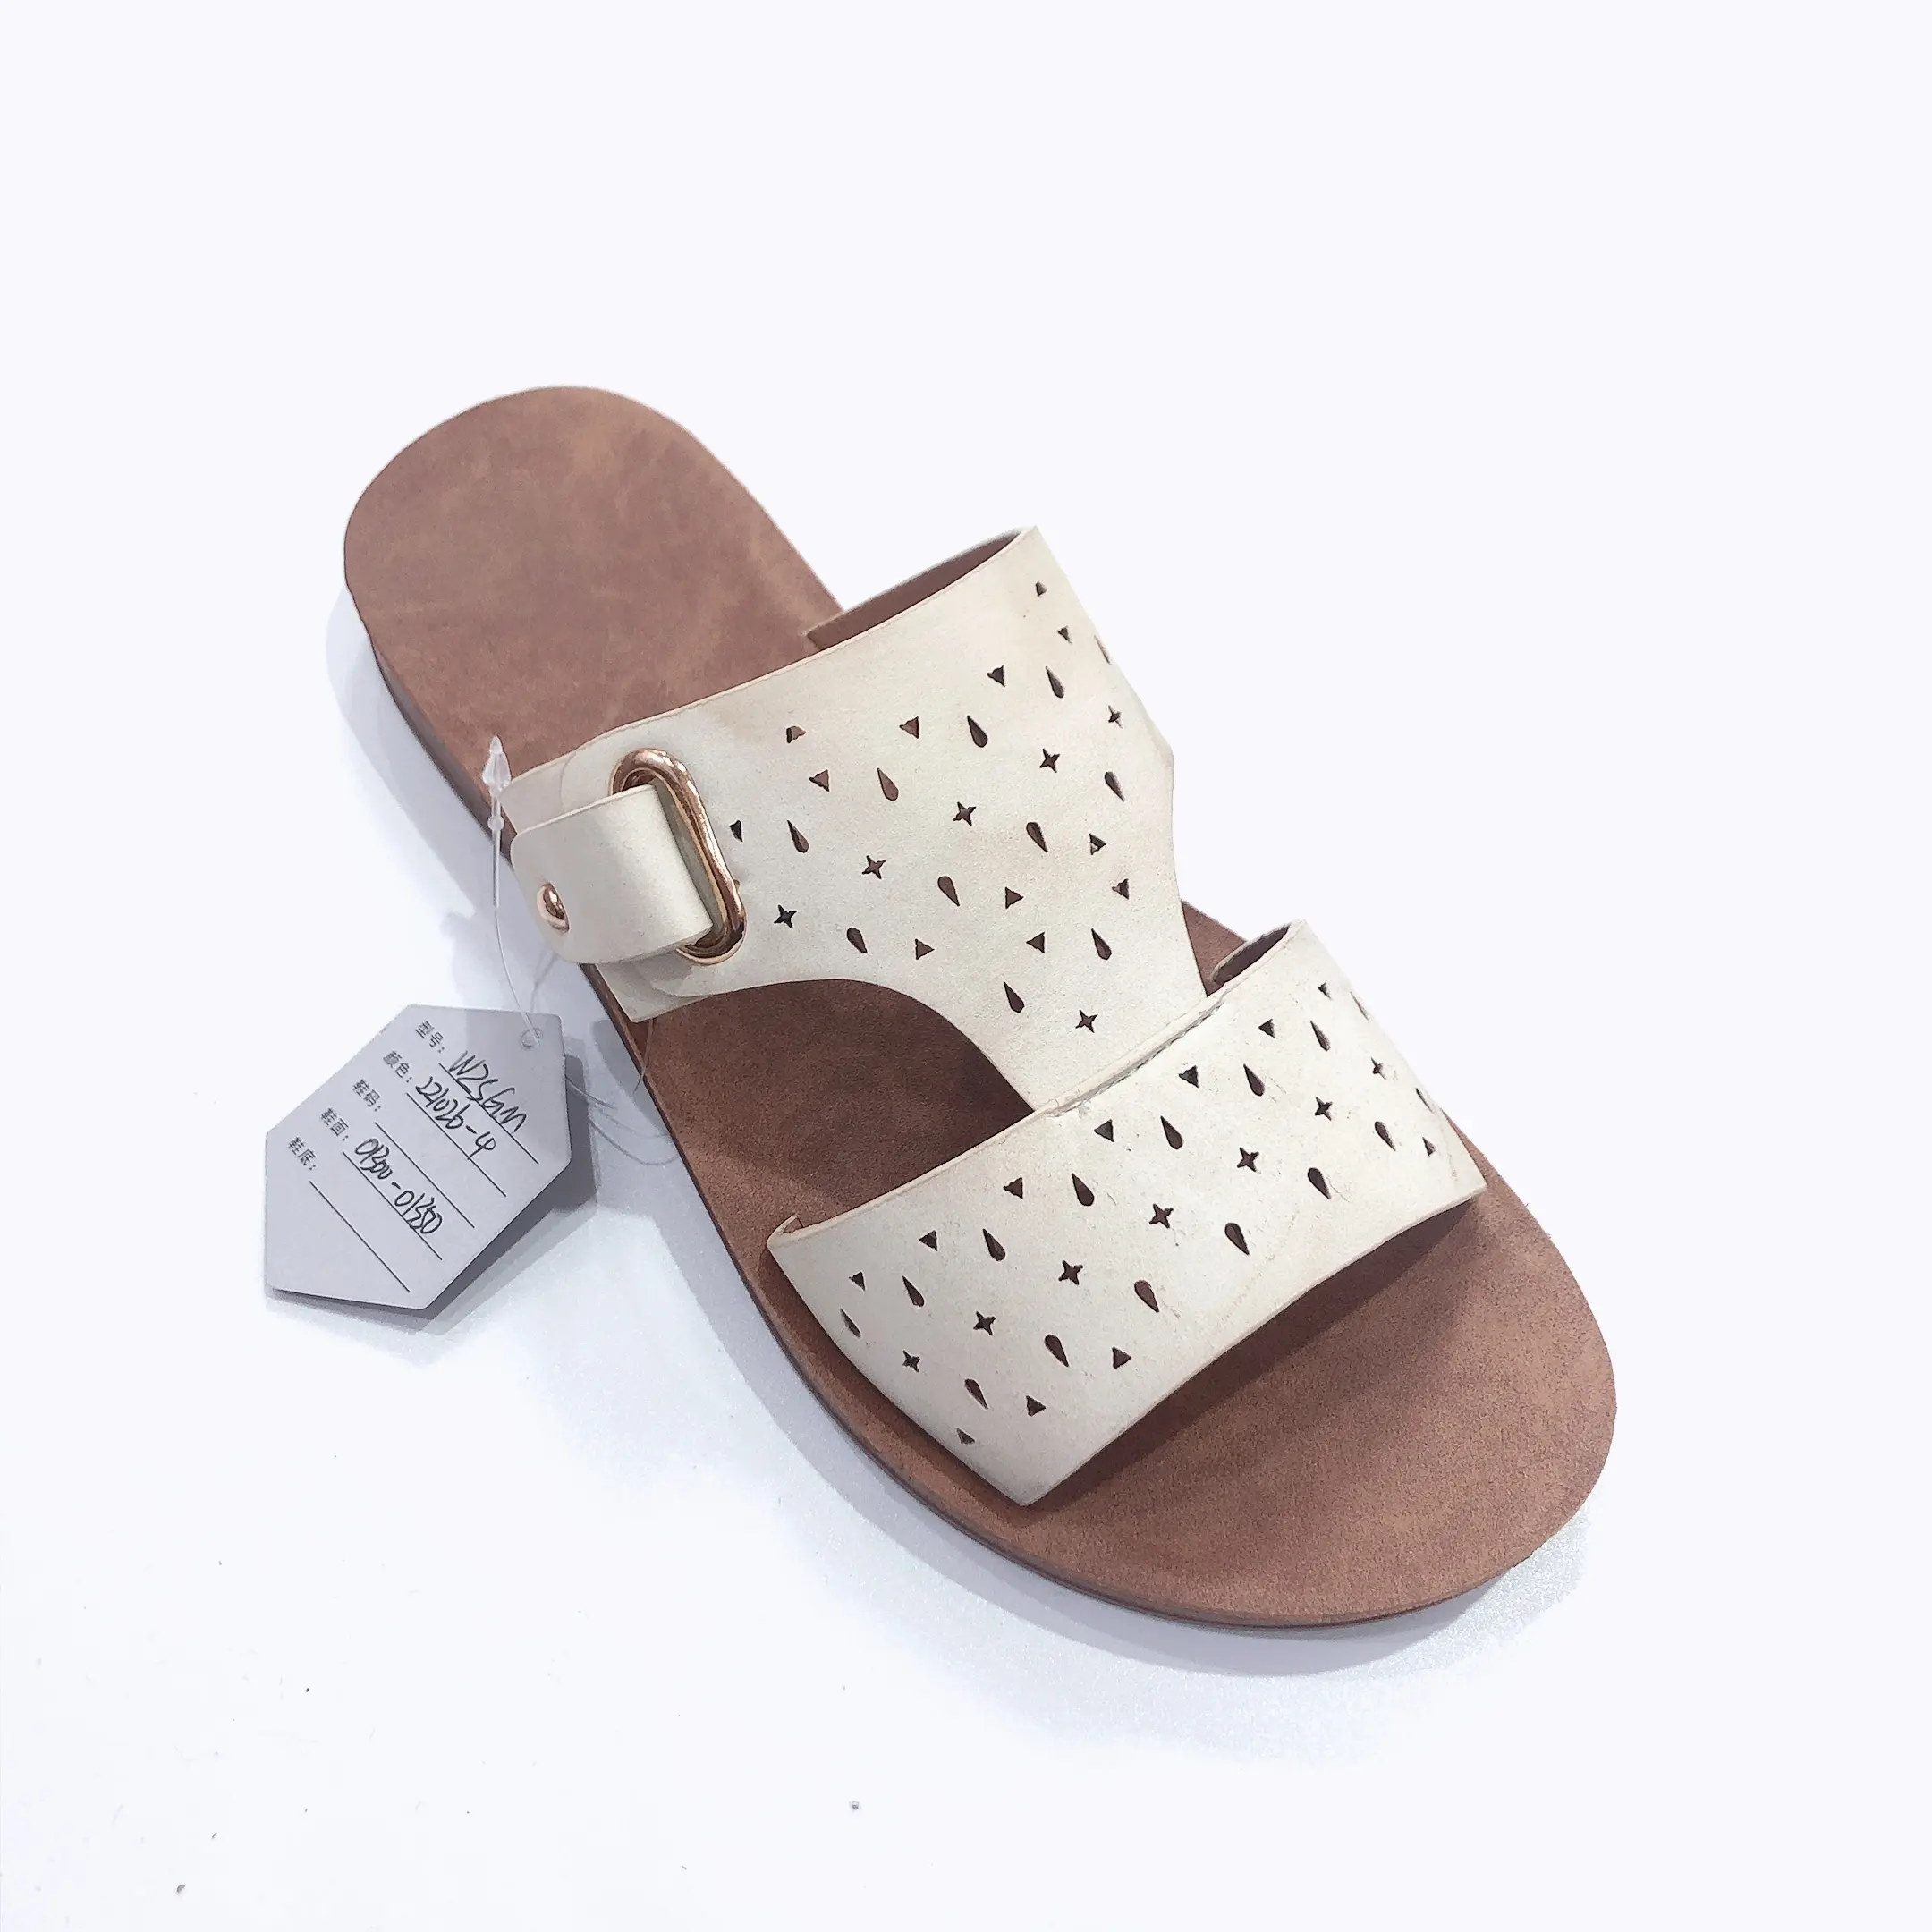 2023 New Design Womens Sandals Vegan Leather Slides for Women With Cushion Bounce Sole anti-slip Women's Flats